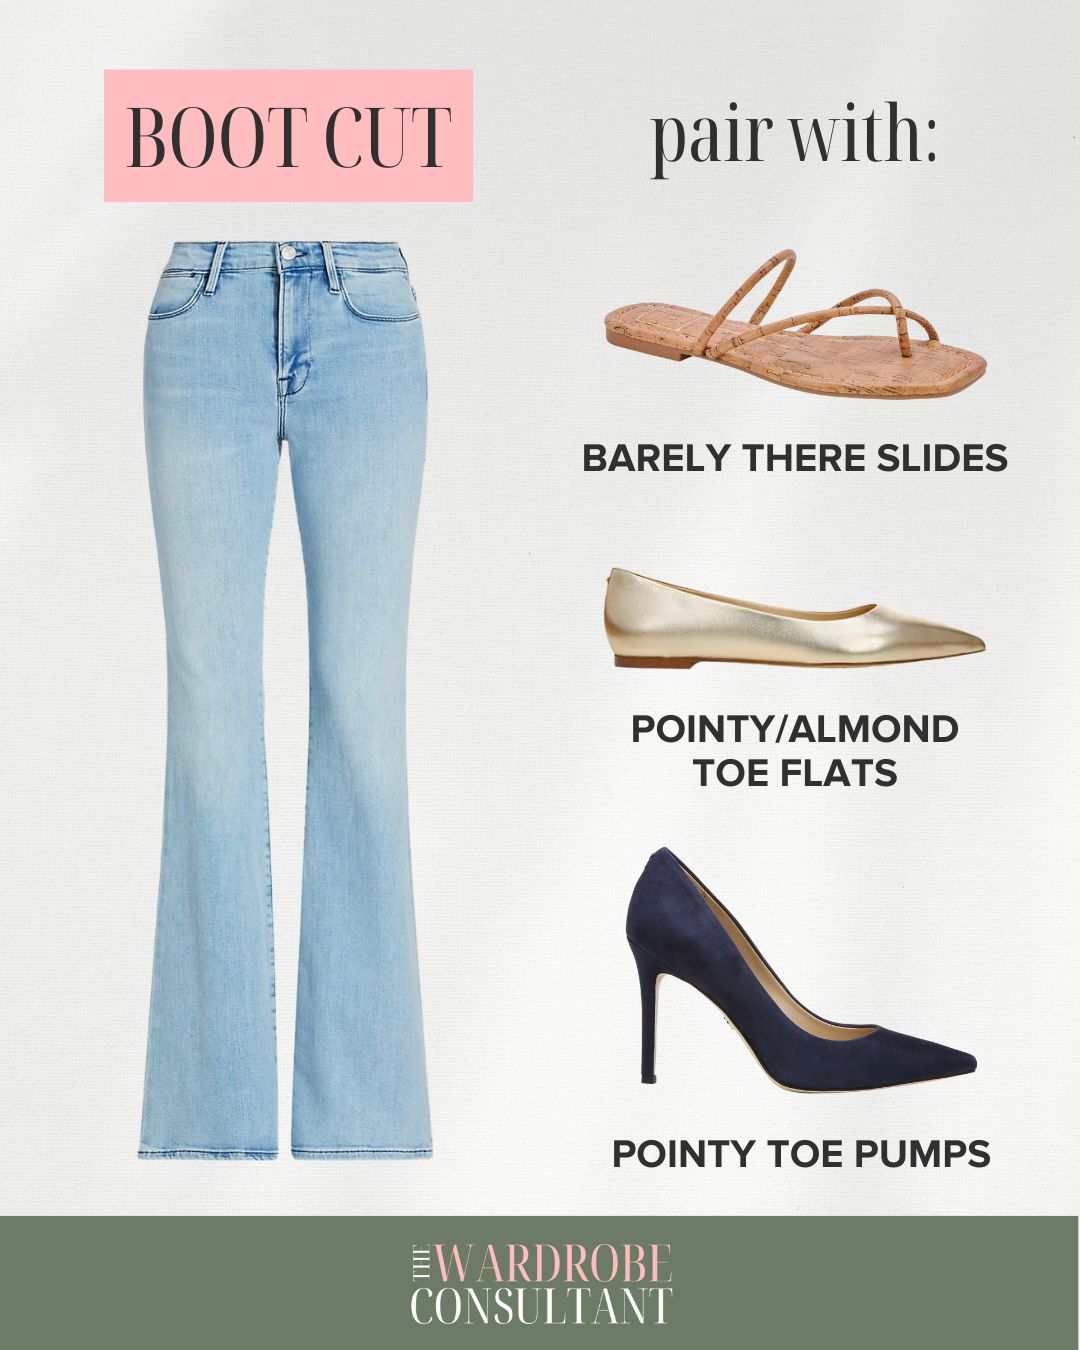 20 Ideas How To Wear Bootcut Jeans The Right Way 2020 | How to wear bootcut  jeans, Jeans and sneakers outfit, Denim fashion